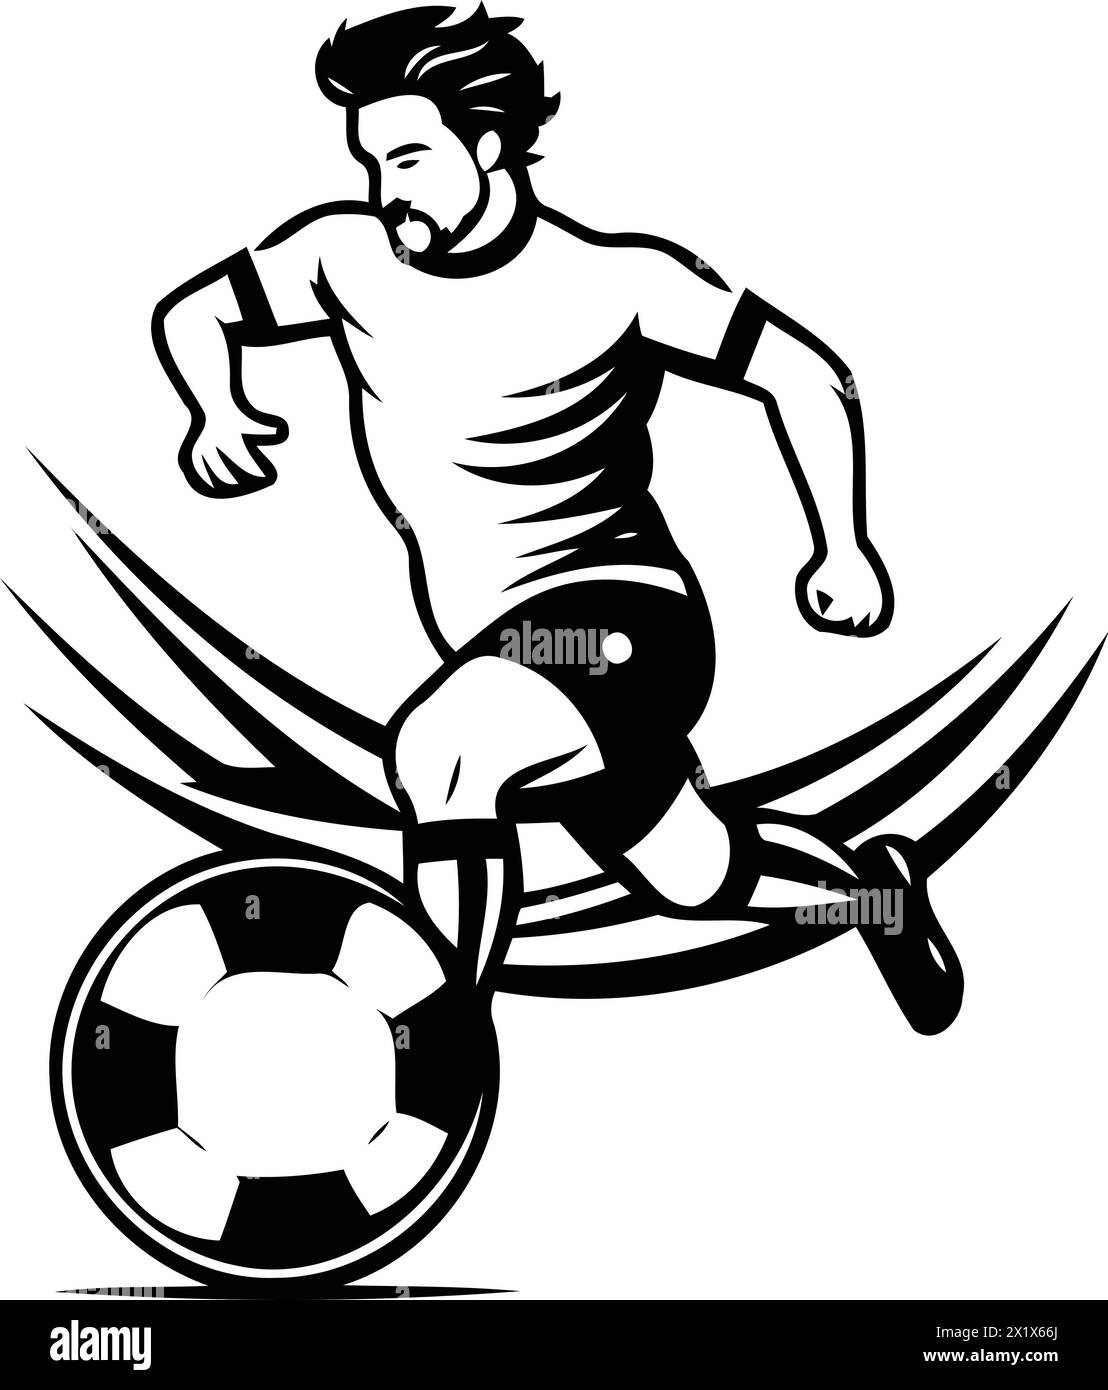 Soccer player with ball. Vector illustration on a white background. Stock Vector